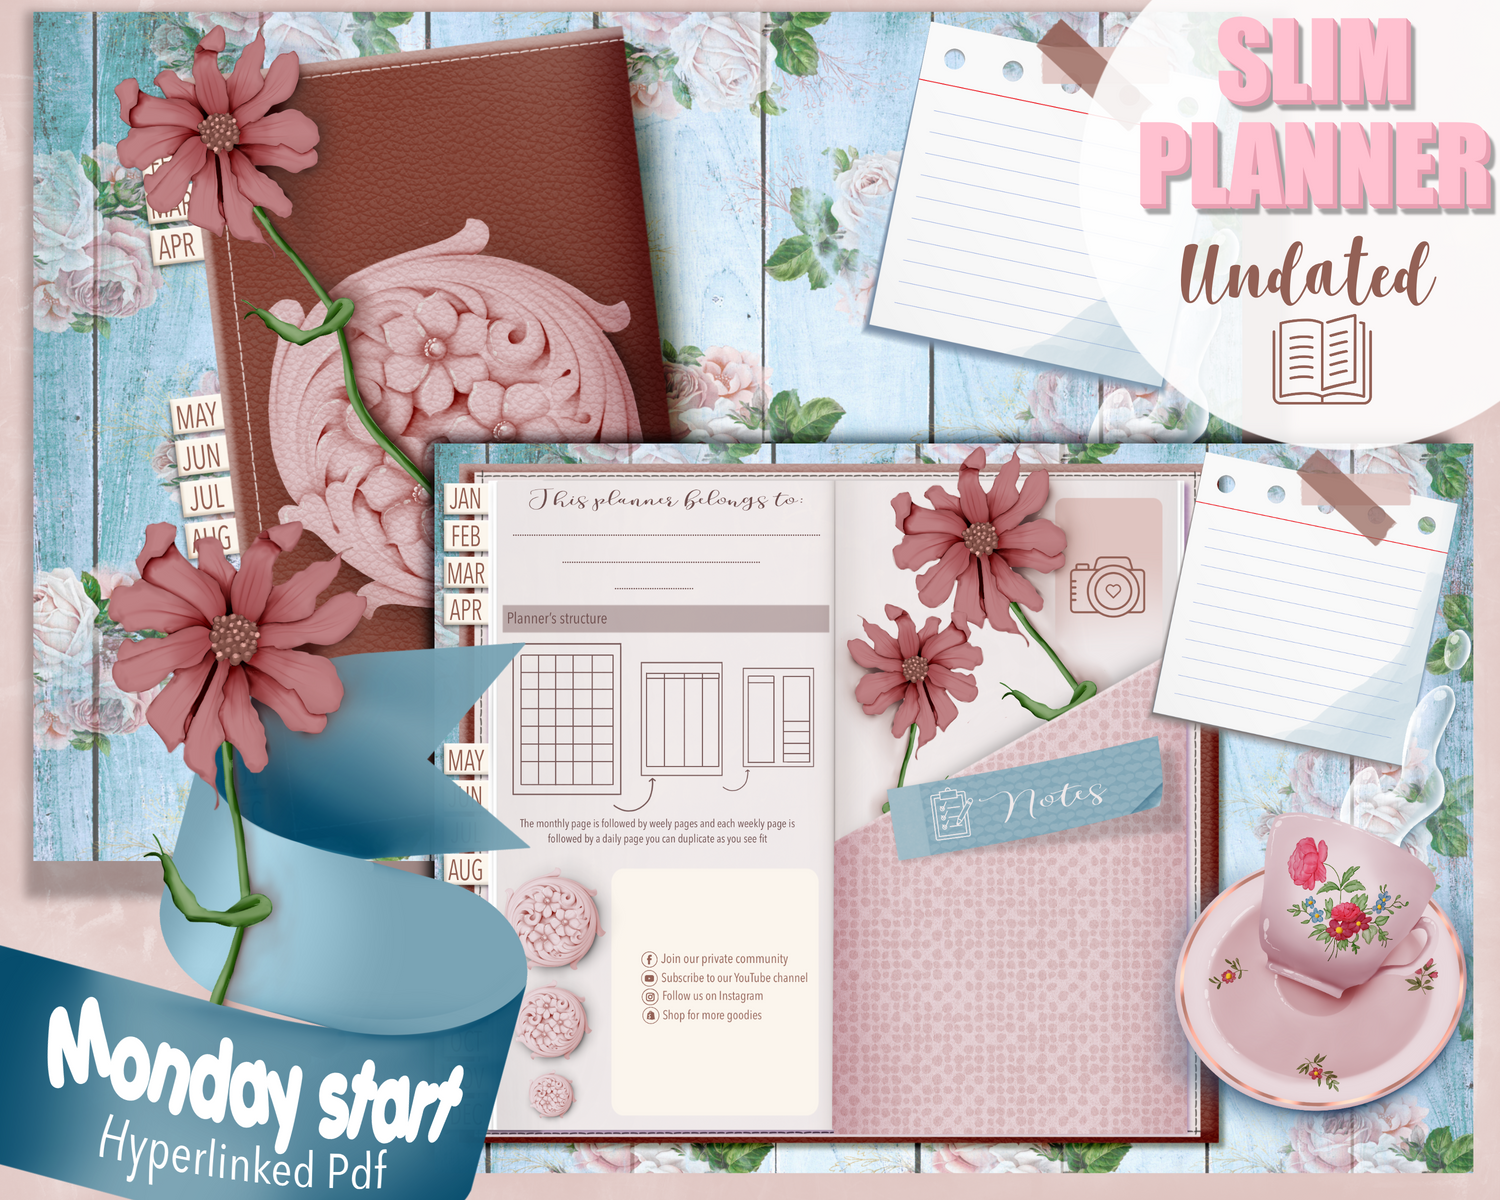 The slim planner-Simply vintage collection (Monday start)